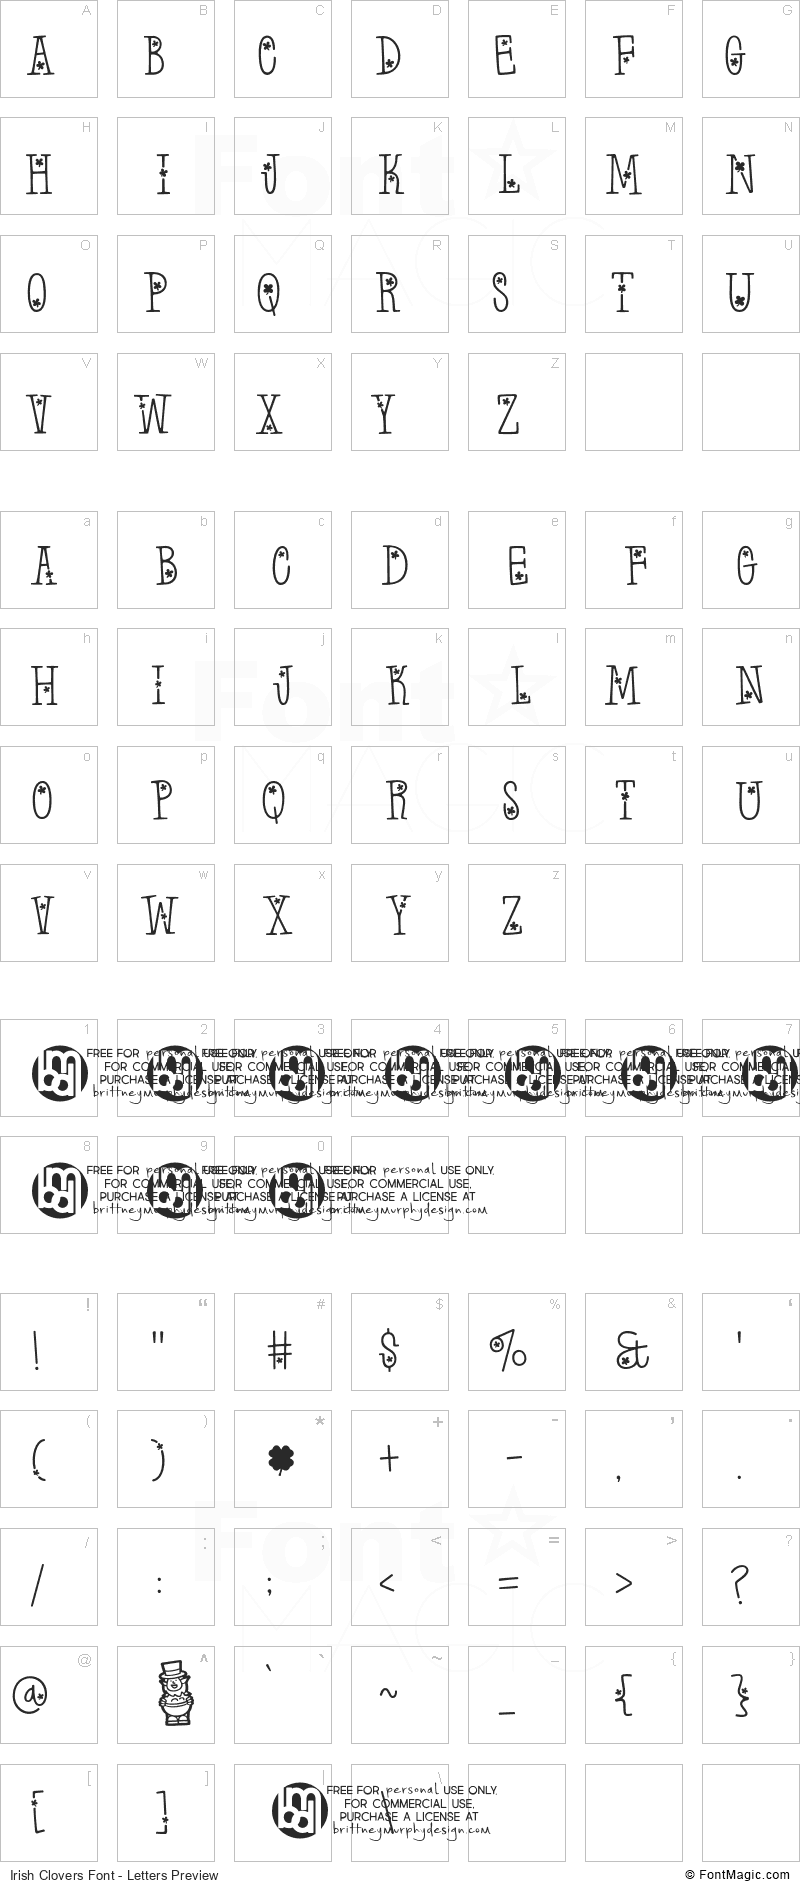 Irish Clovers Font - All Latters Preview Chart